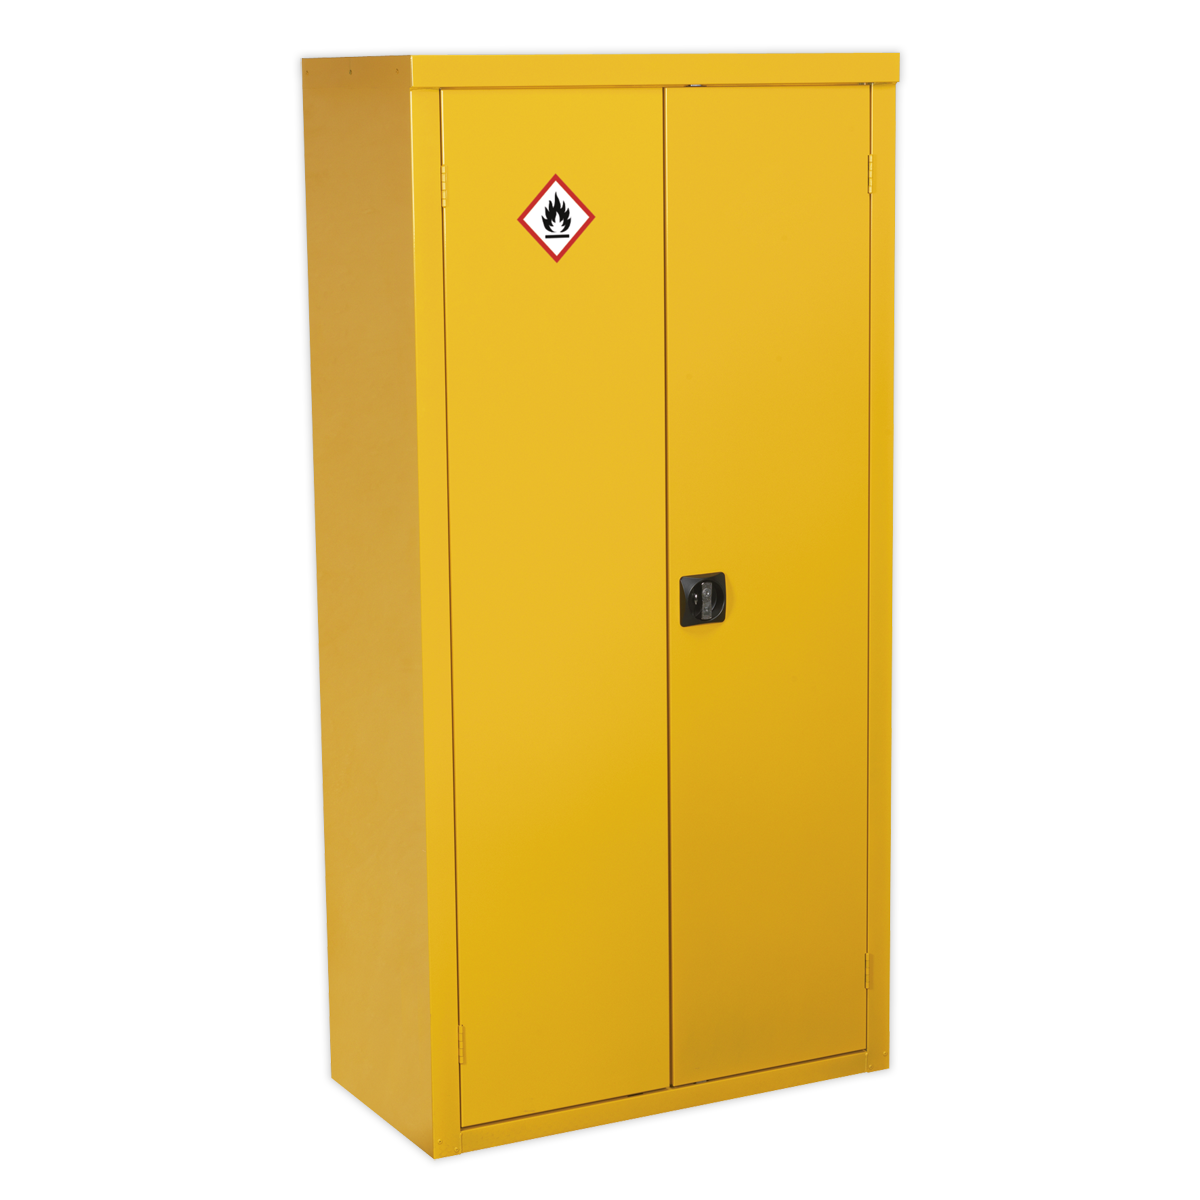 Sealey safe chemical storage cabinets